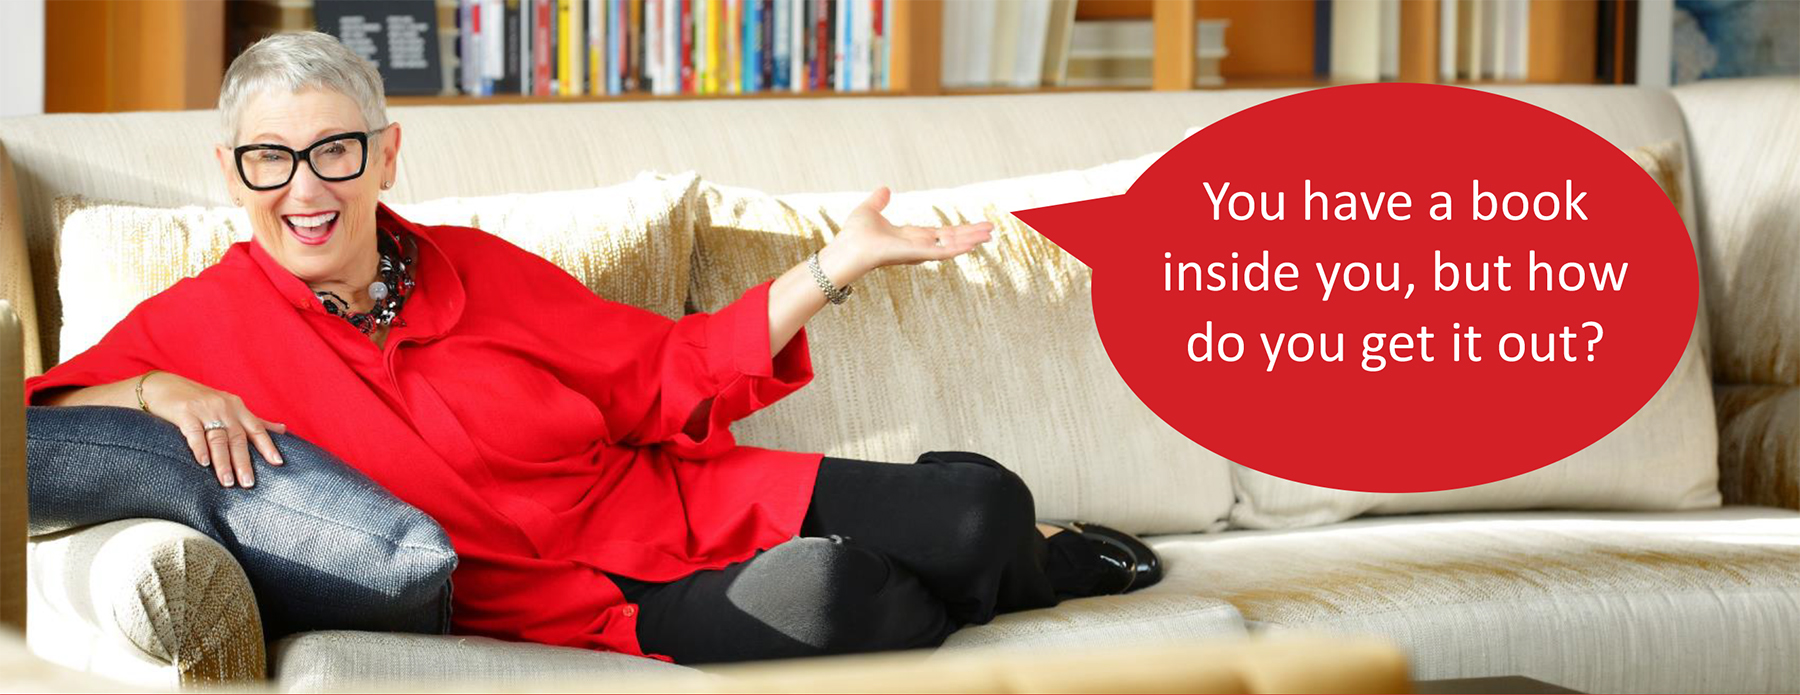 Cathy on a couch with the text: You have a book inside you, but how do you get it out?